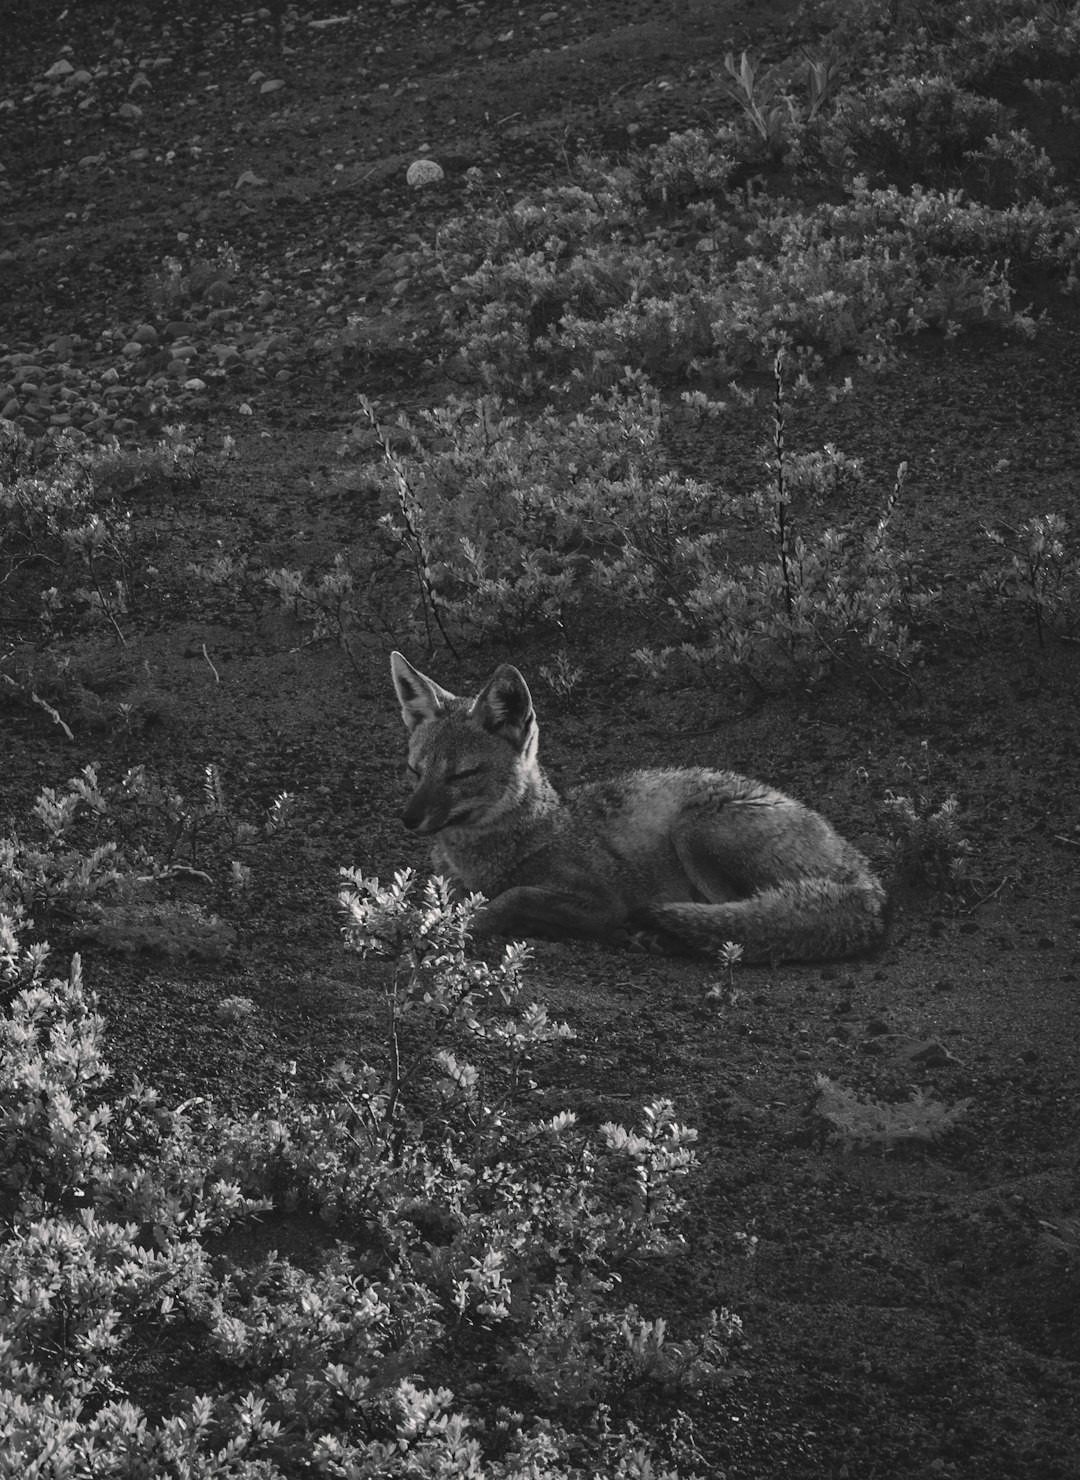 fox on grass field in grayscale photography